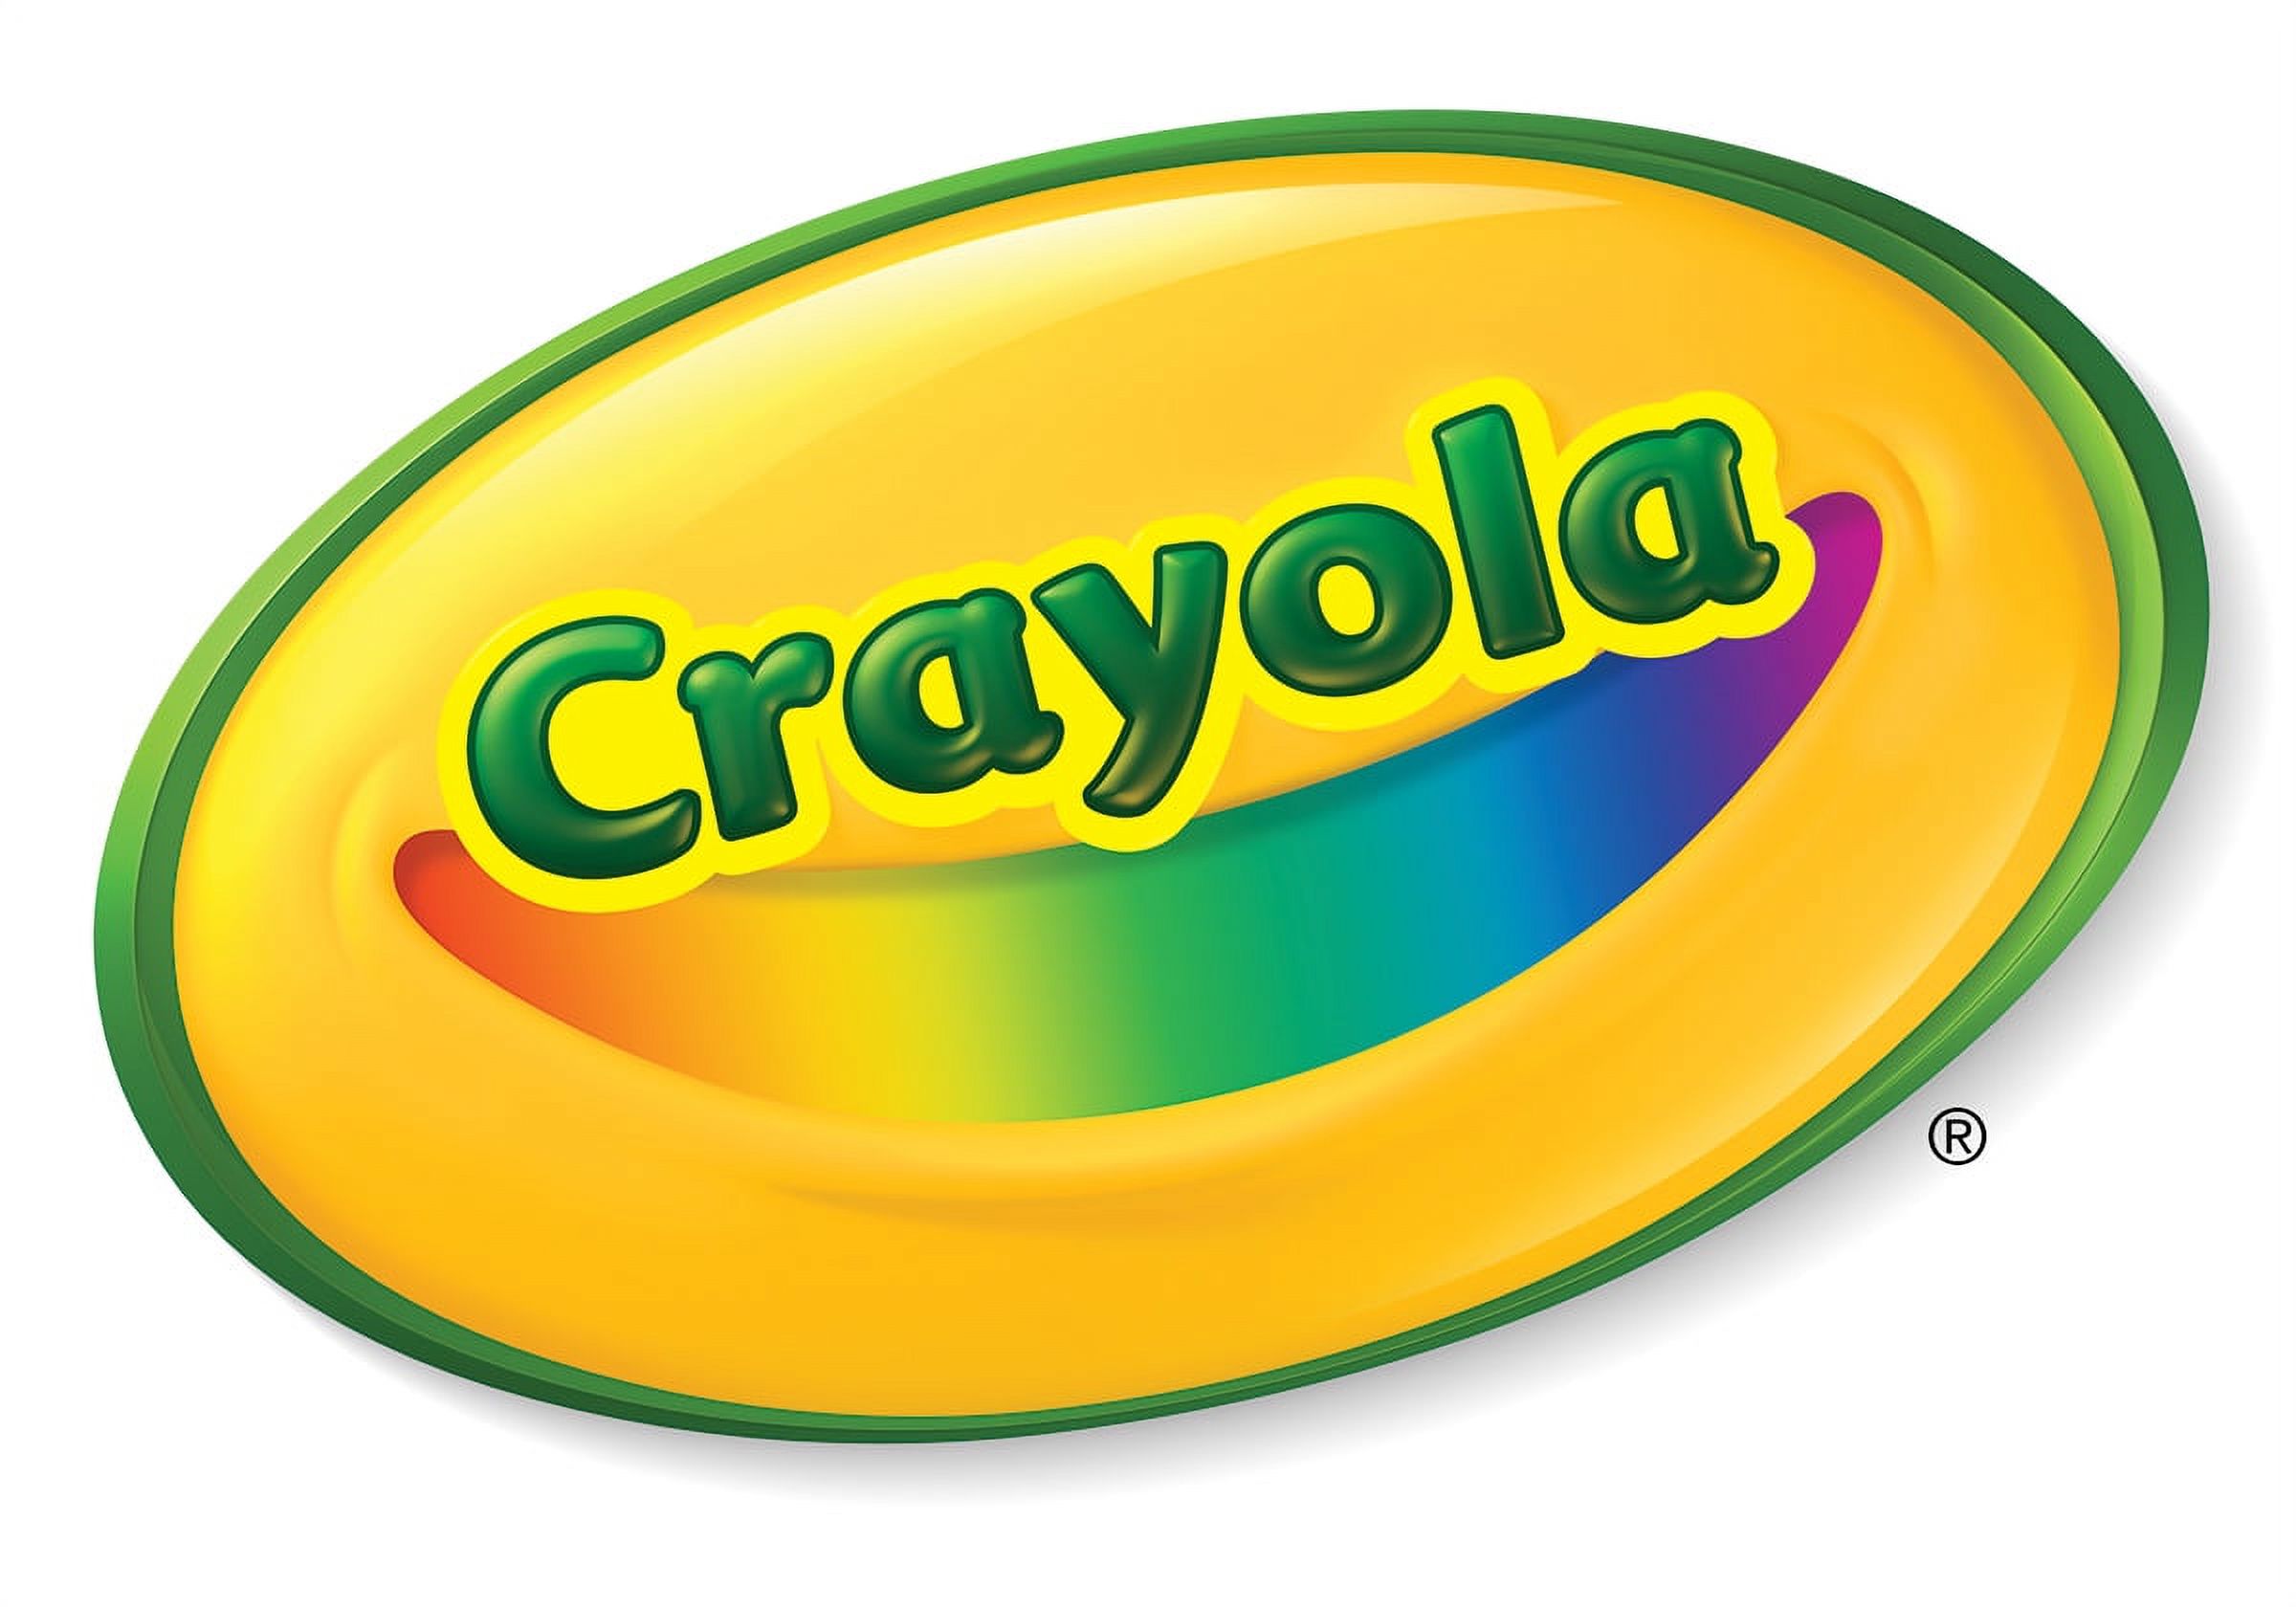 Crayola Construction Colored Paper in 10 Colors, School Supplies for Kindergarten, 120 Pcs, Child - image 9 of 11